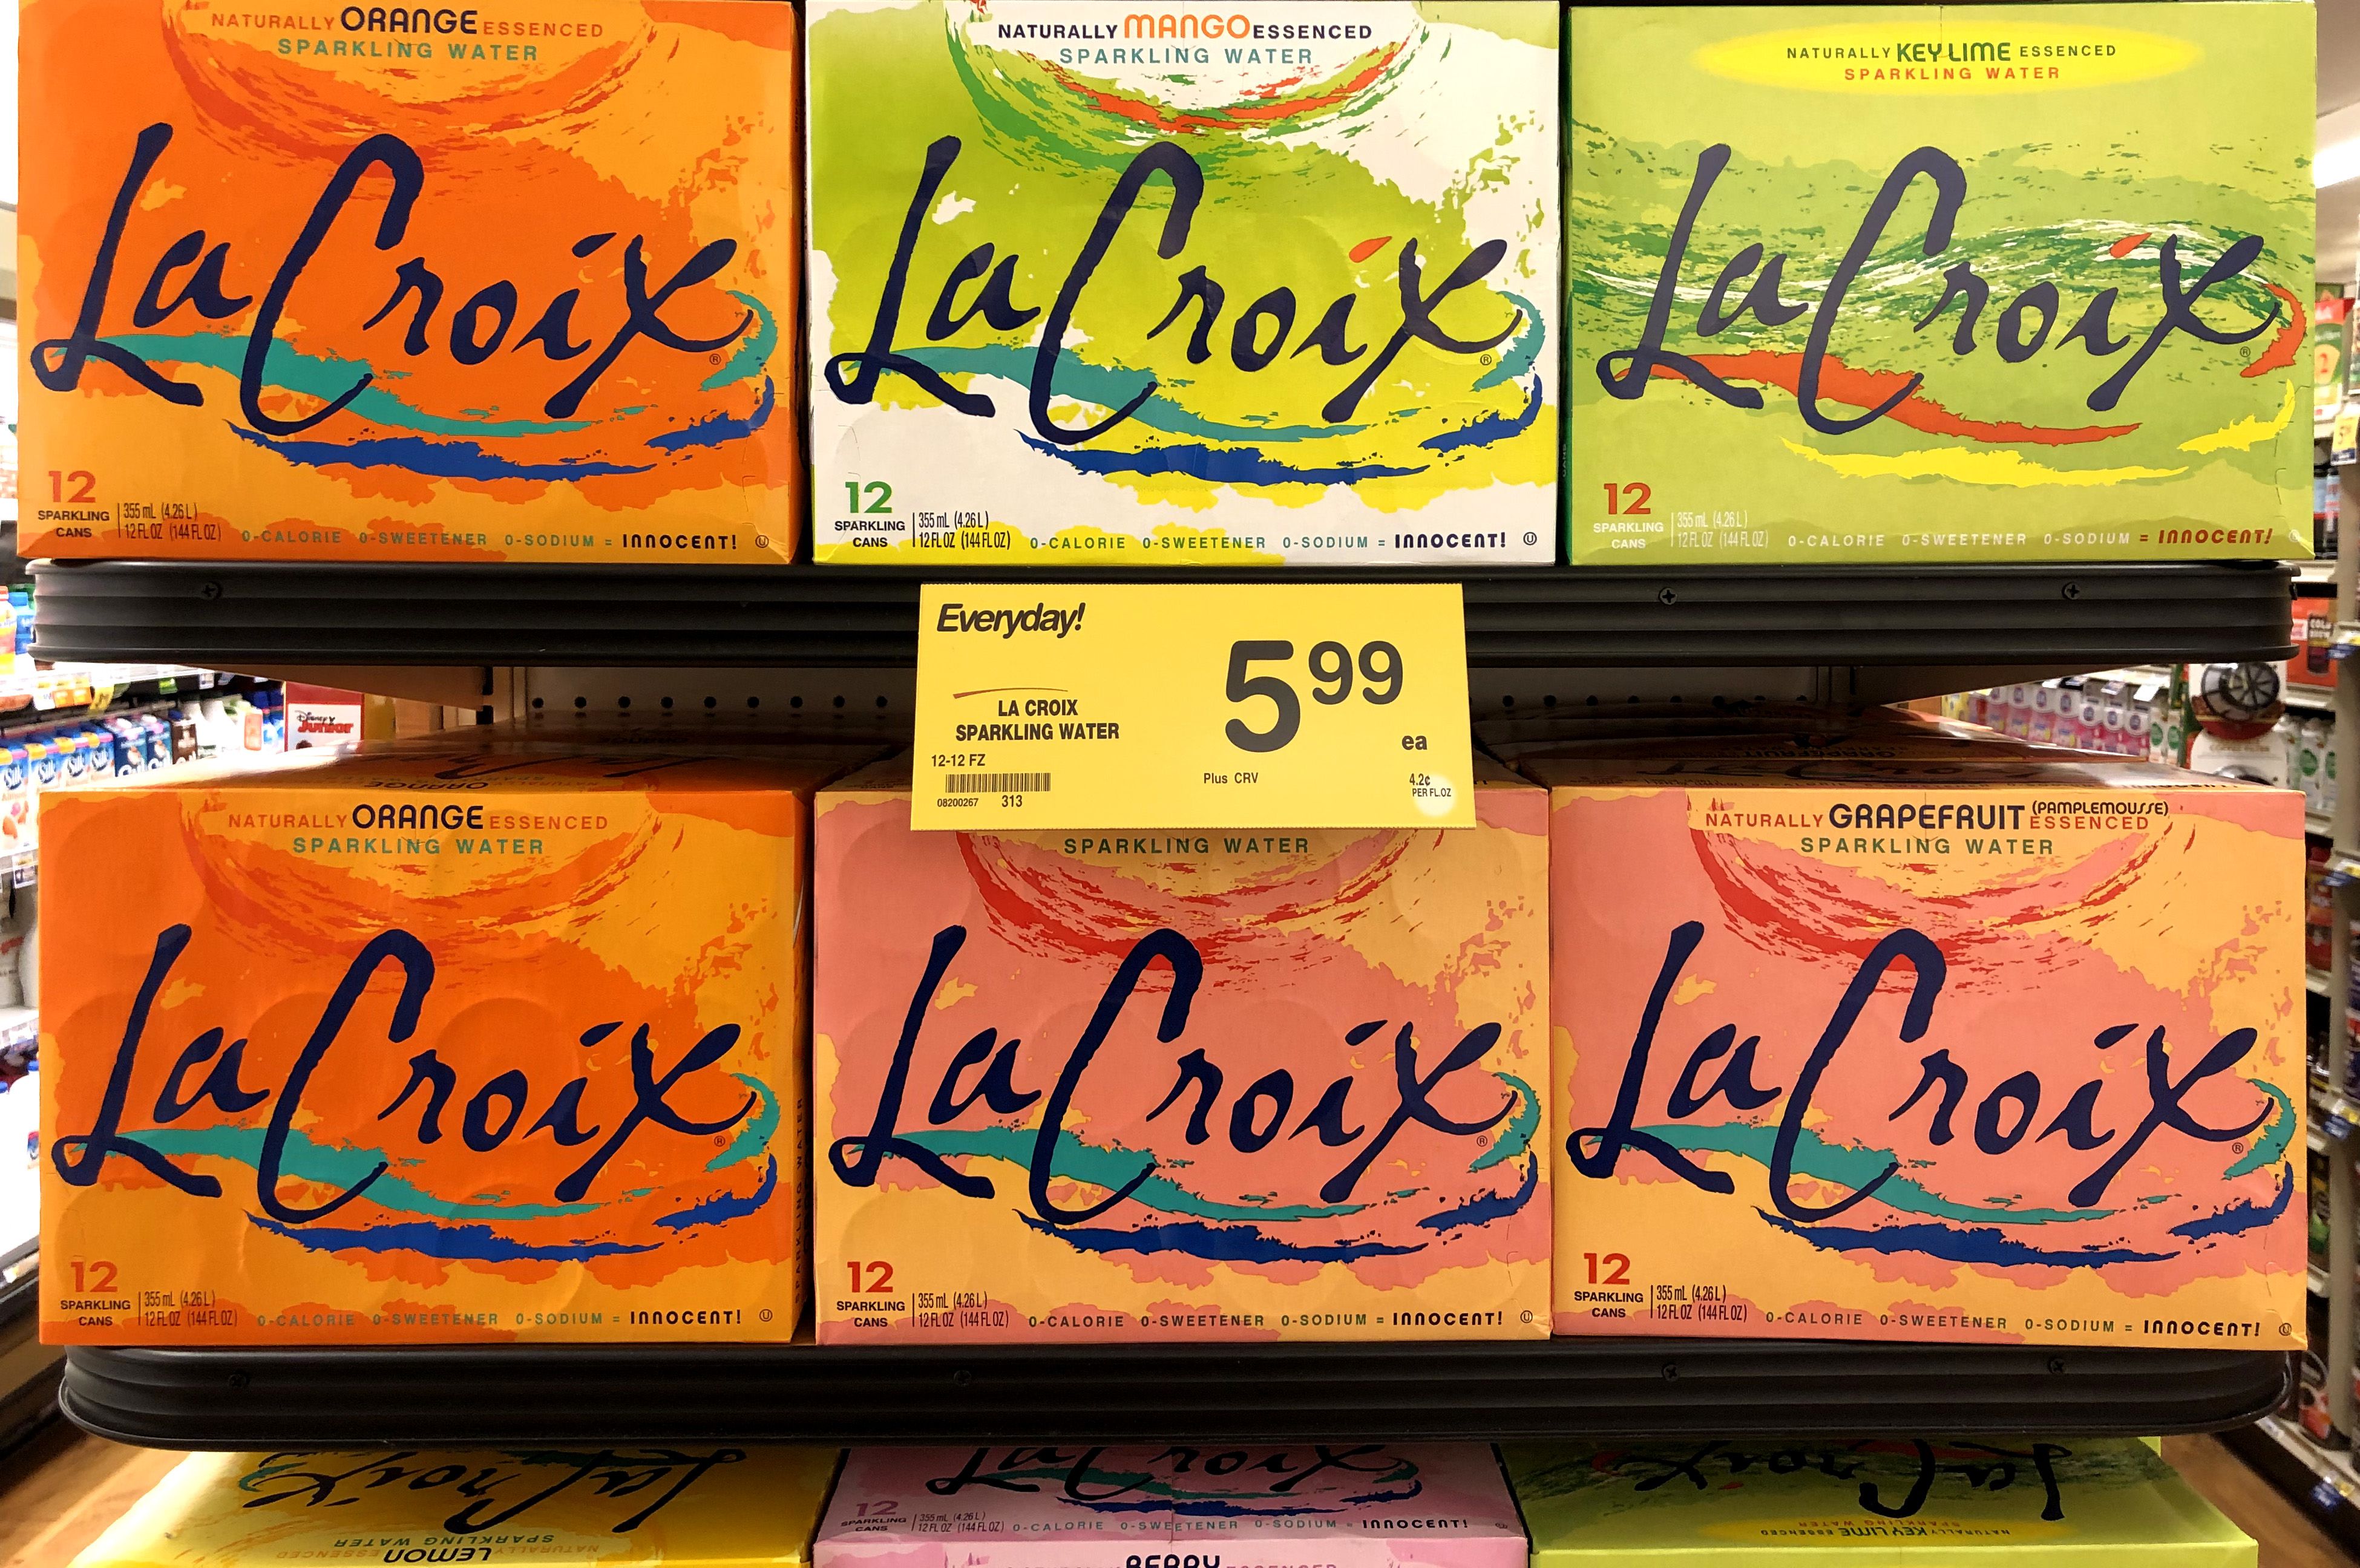 LaCroix parent company National Beverage falls to multiyear low following lawsuit